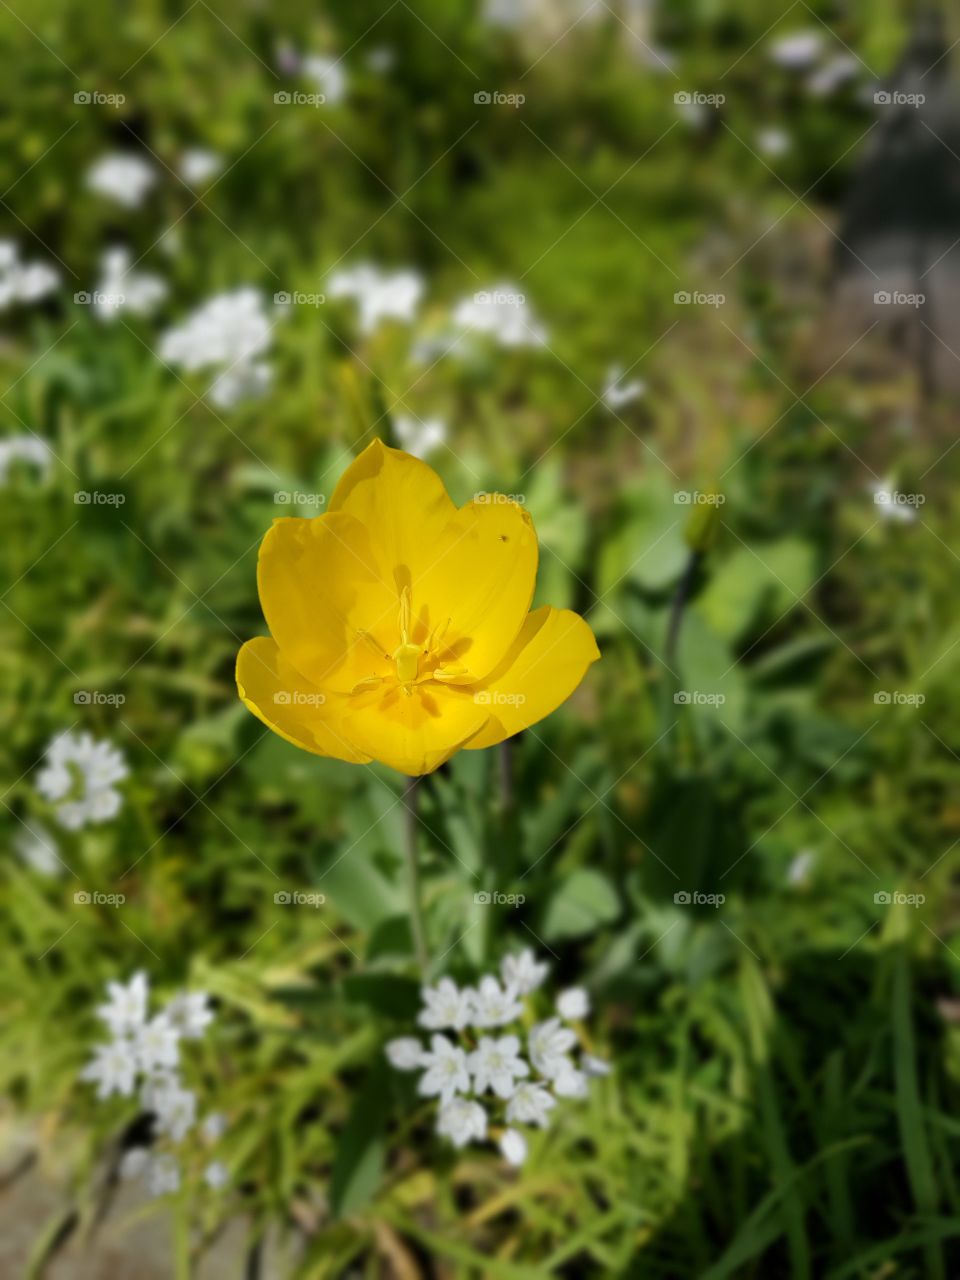 just a yellow flower